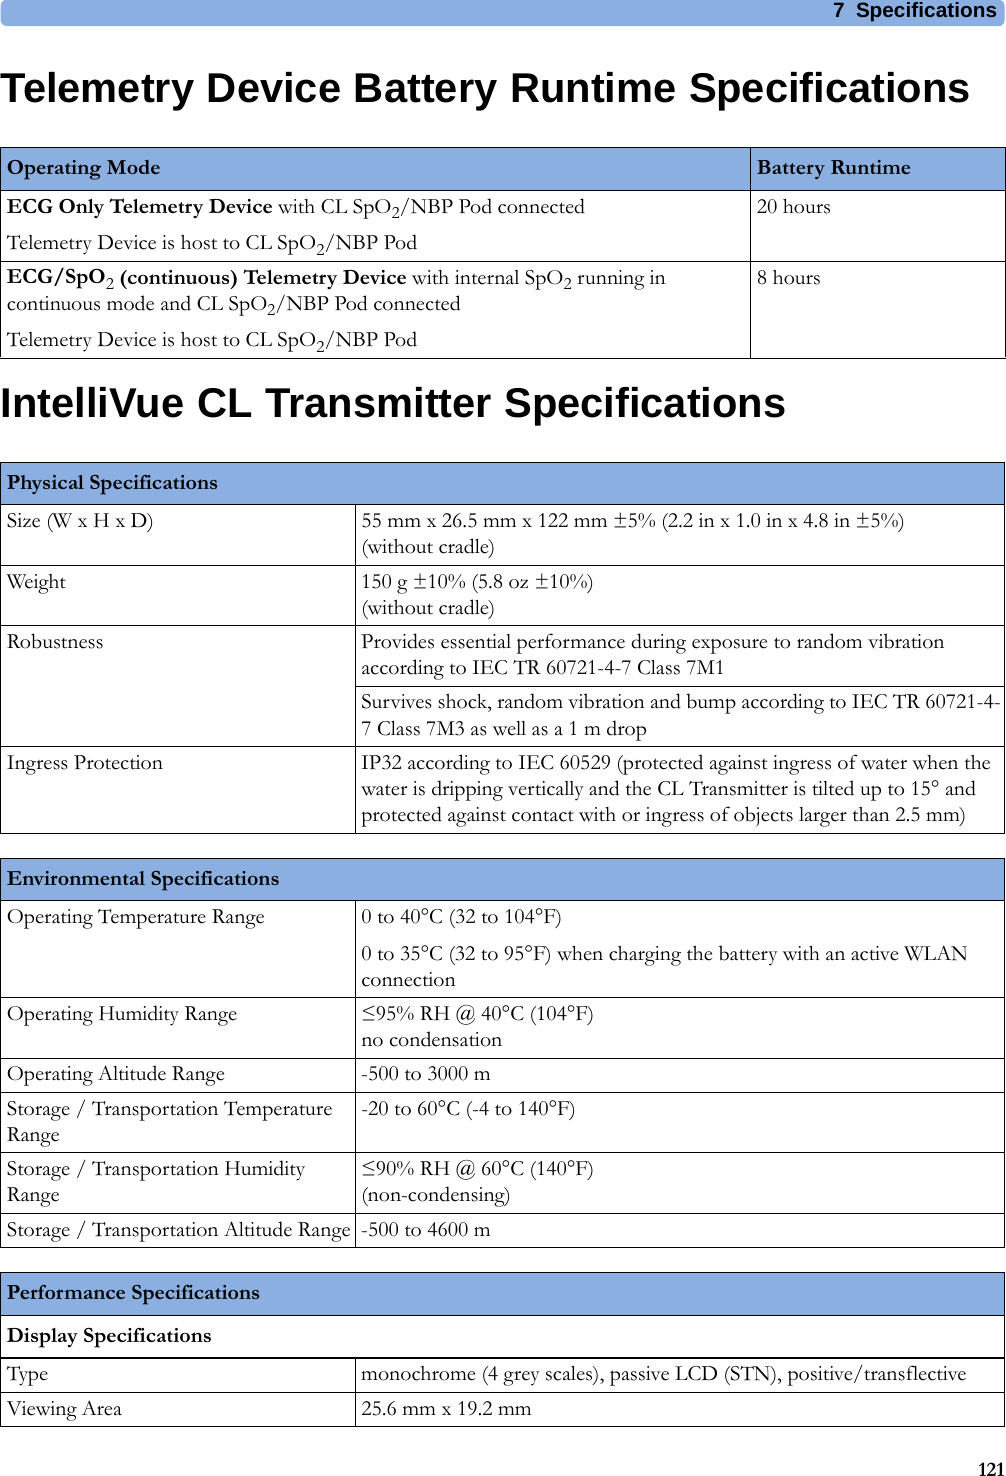 7 Specifications121Telemetry Device Battery Runtime SpecificationsIntelliVue CL Transmitter SpecificationsOperating Mode Battery RuntimeECG Only Telemetry Device with CL SpO2/NBP Pod connectedTelemetry Device is host to CL SpO2/NBP Pod20 hoursECG/SpO2 (continuous) Telemetry Device with internal SpO2 running in continuous mode and CL SpO2/NBP Pod connectedTelemetry Device is host to CL SpO2/NBP Pod8 hoursPhysical SpecificationsSize (W x H x D) 55 mm x 26.5 mm x 122 mm ±5% (2.2 in x 1.0 in x 4.8 in ±5%)(without cradle)Weight 150 g ±10% (5.8 oz ±10%)(without cradle)Robustness Provides essential performance during exposure to random vibration according to IEC TR 60721-4-7 Class 7M1Survives shock, random vibration and bump according to IEC TR 60721-4-7 Class 7M3 as well as a 1 m dropIngress Protection IP32 according to IEC 60529 (protected against ingress of water when the water is dripping vertically and the CL Transmitter is tilted up to 15° and protected against contact with or ingress of objects larger than 2.5 mm)Environmental SpecificationsOperating Temperature Range 0 to 40°C (32 to 104°F)0 to 35°C (32 to 95°F) when charging the battery with an active WLAN connectionOperating Humidity Range ≤95% RH @ 40°C (104°F)no condensationOperating Altitude Range -500 to 3000 mStorage / Transportation Temperature Range-20 to 60°C (-4 to 140°F)Storage / Transportation Humidity Range≤90% RH @ 60°C (140°F)(non-condensing)Storage / Transportation Altitude Range -500 to 4600 mPerformance SpecificationsDisplay SpecificationsType monochrome (4 grey scales), passive LCD (STN), positive/transflectiveViewing Area 25.6 mm x 19.2 mm